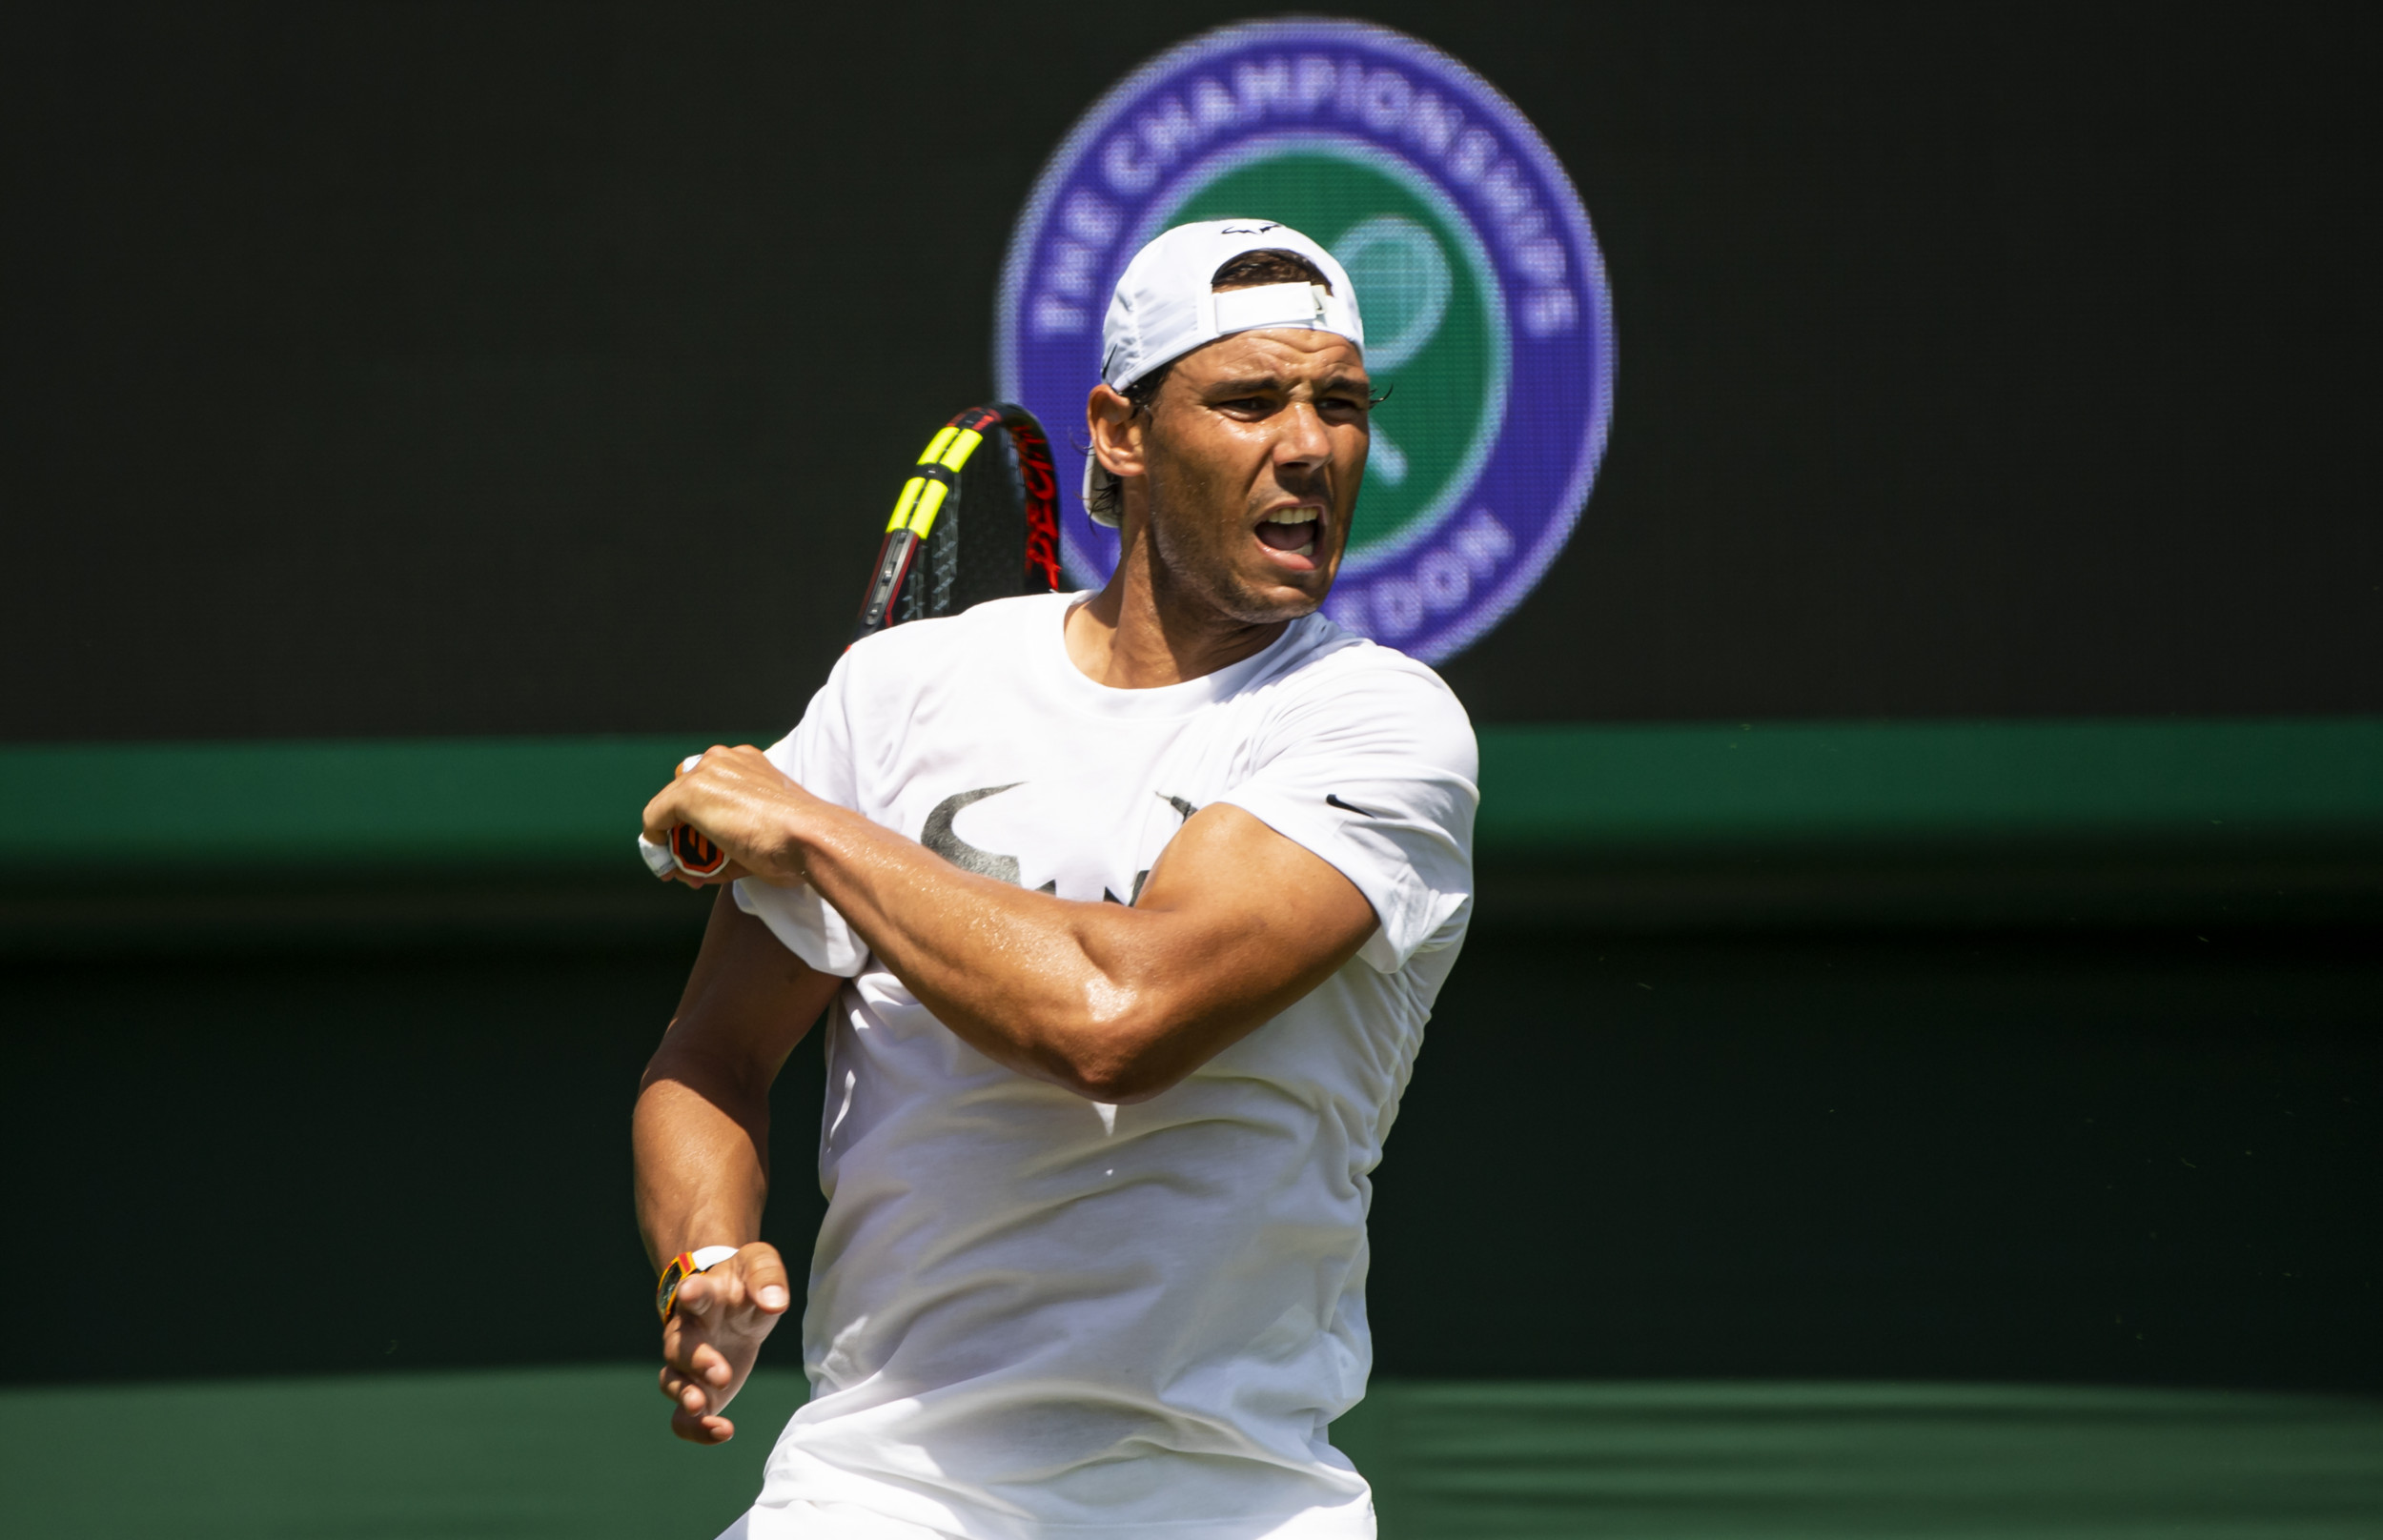 Wimbledon 2019: How to Watch Nadal, Federer, Williams First Round Matches, Schedule, Live Stream